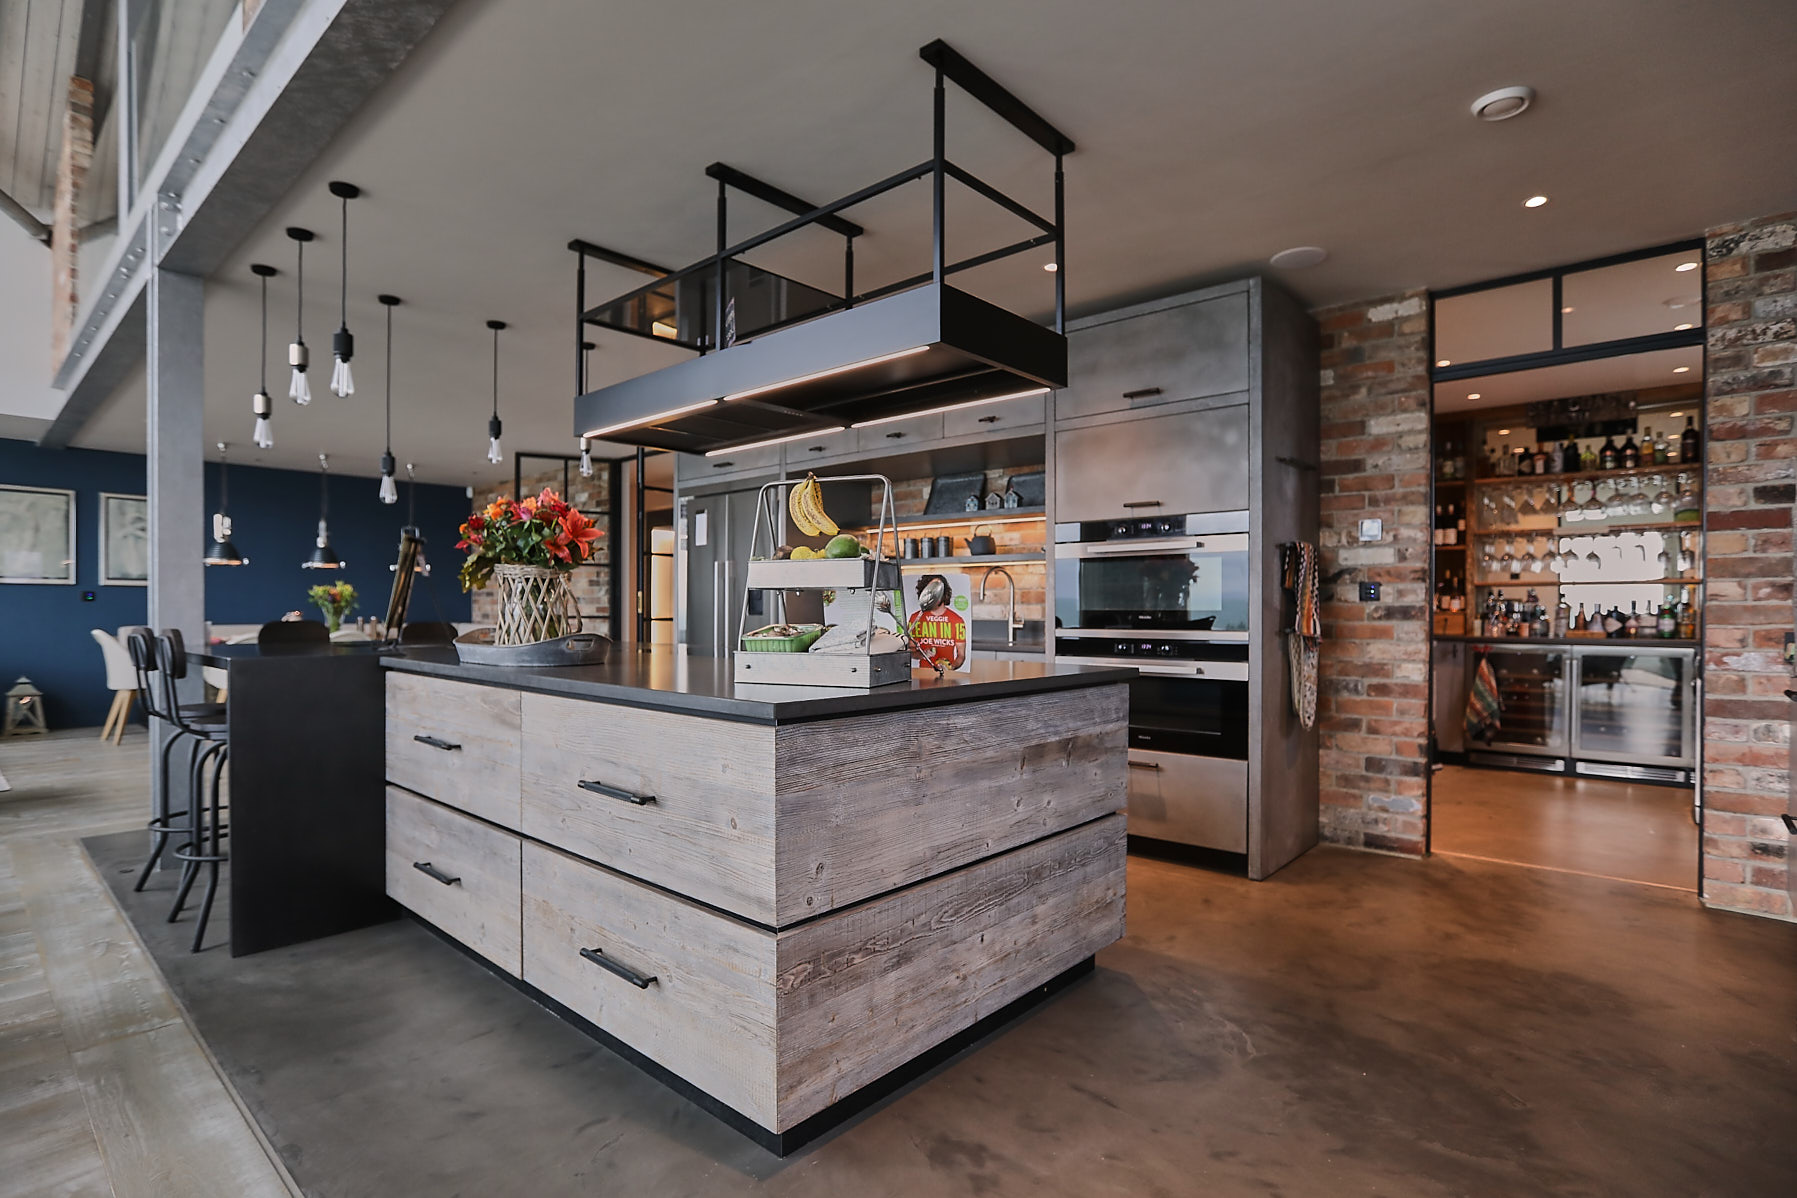 Mixing concrete, zinc and reclaimed wood in bespoke kitchen